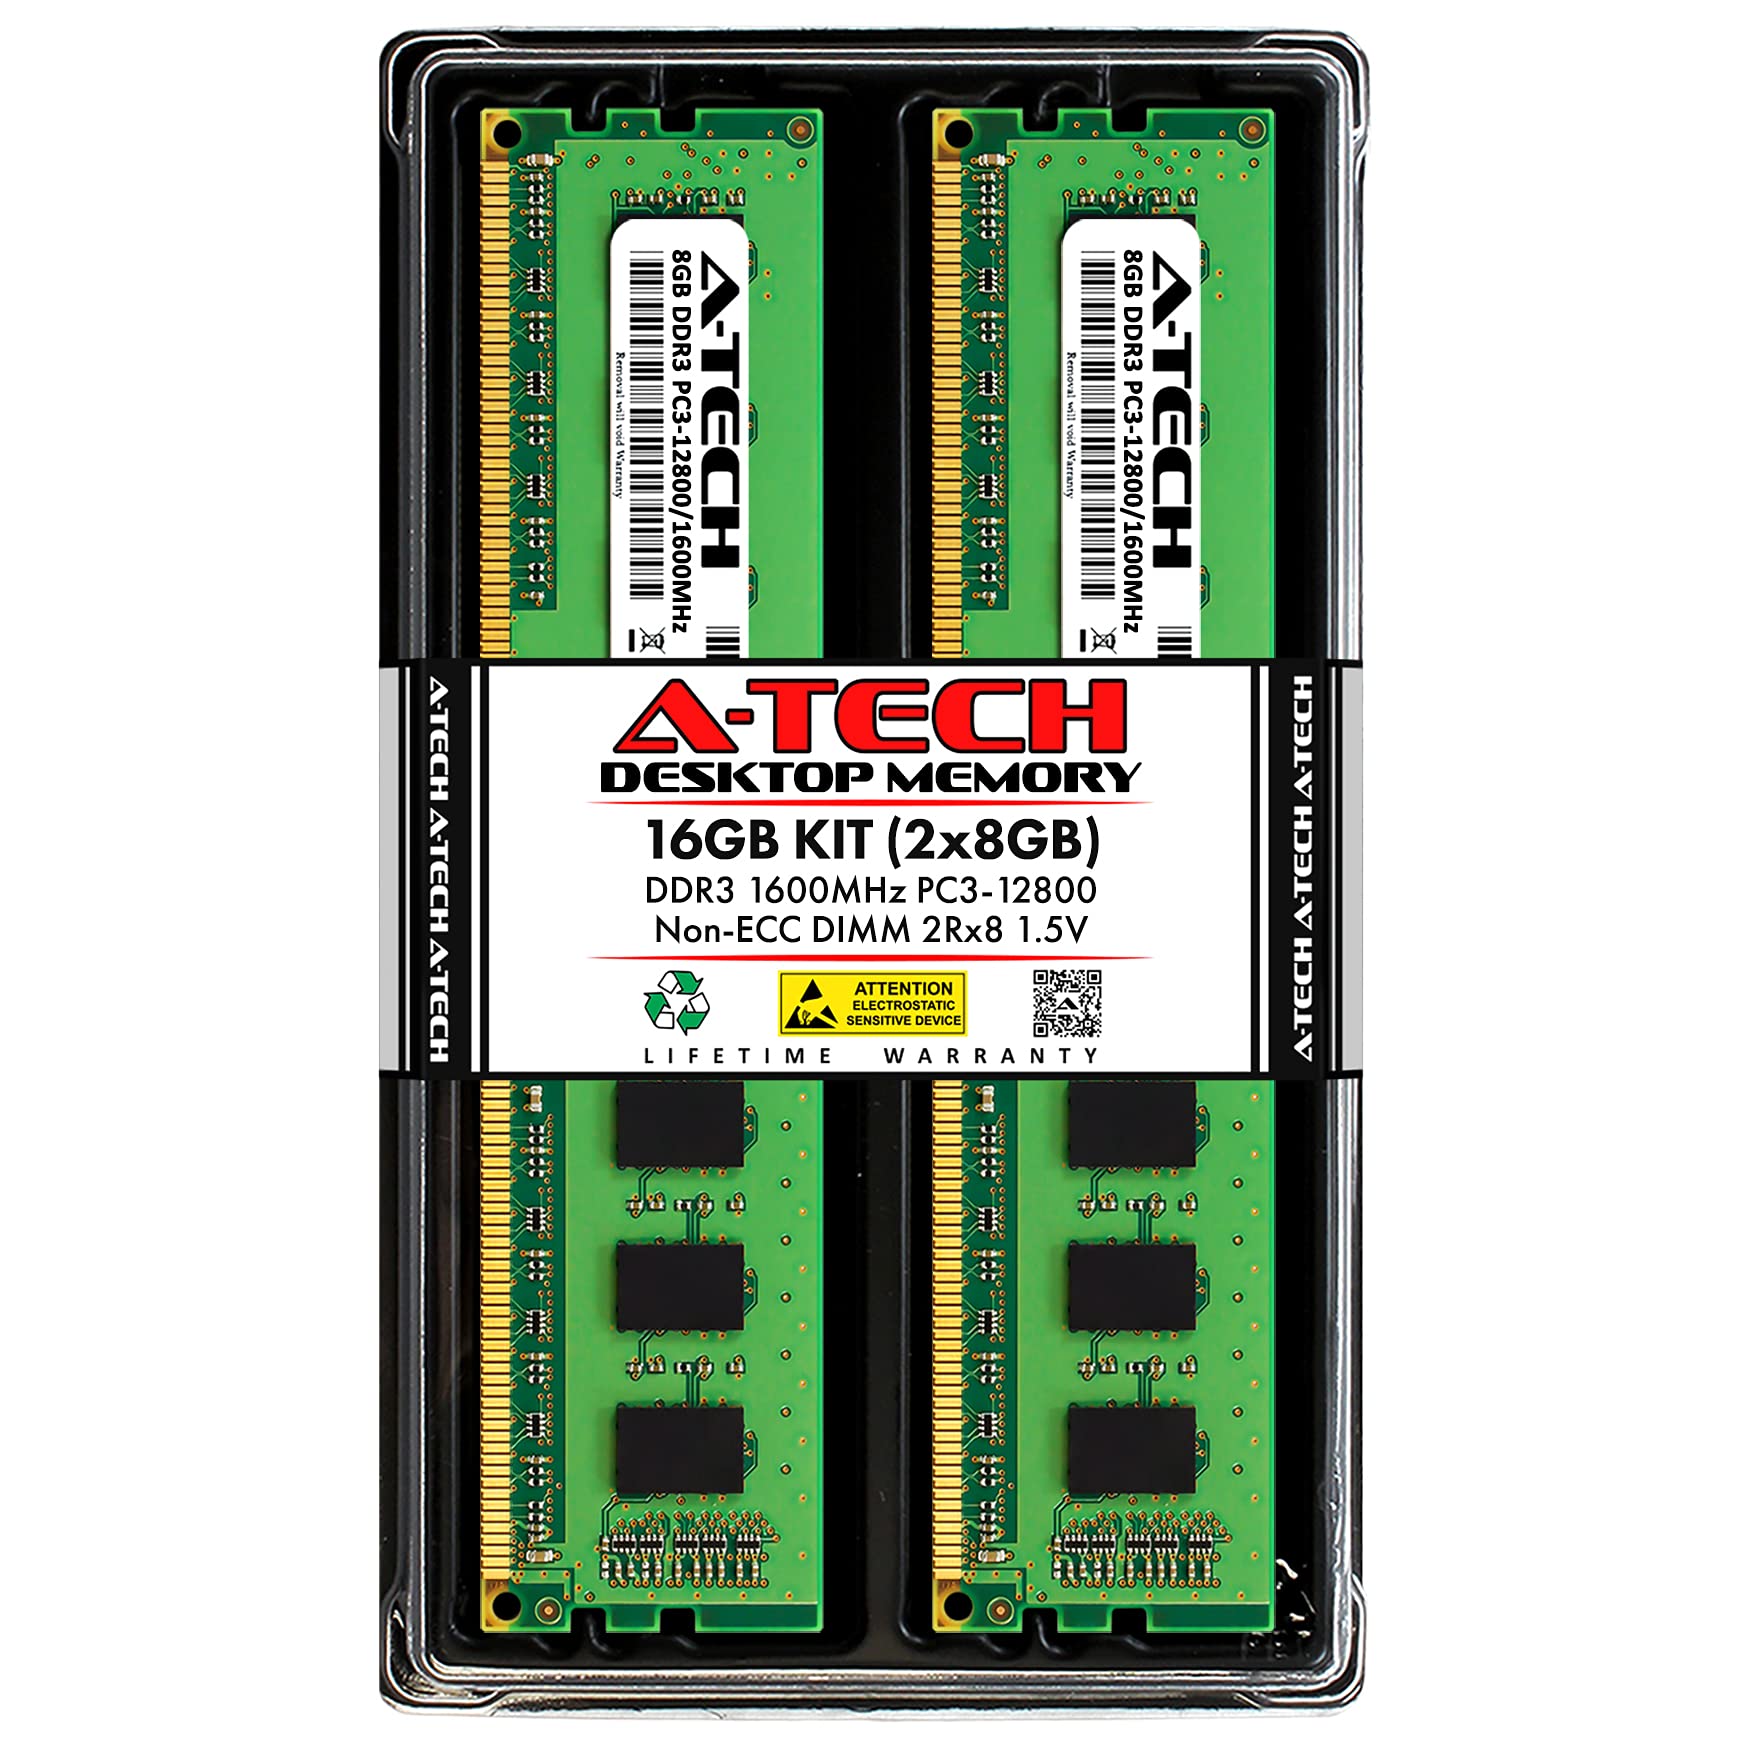 A-Tech 8GB DDR3 1600 PC3-12800 2Rx8 1.5V 非ECC DIMM デスクトップRAMキット Parent 8 GB AT8G2D3D1600ND8N15V並行